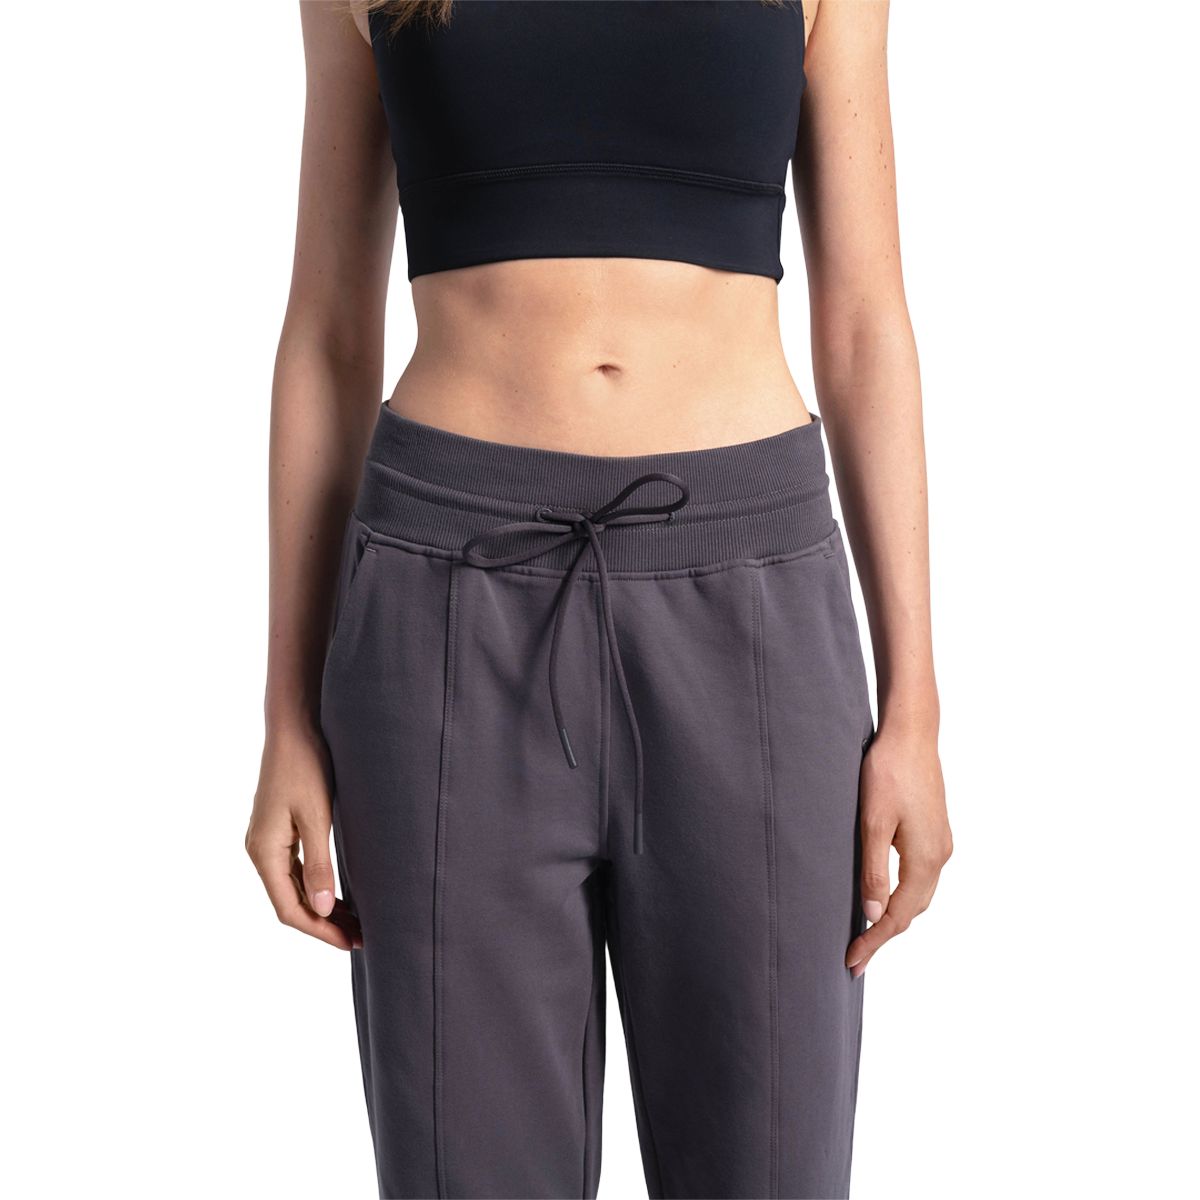 Lole Travel Pant in Black 6